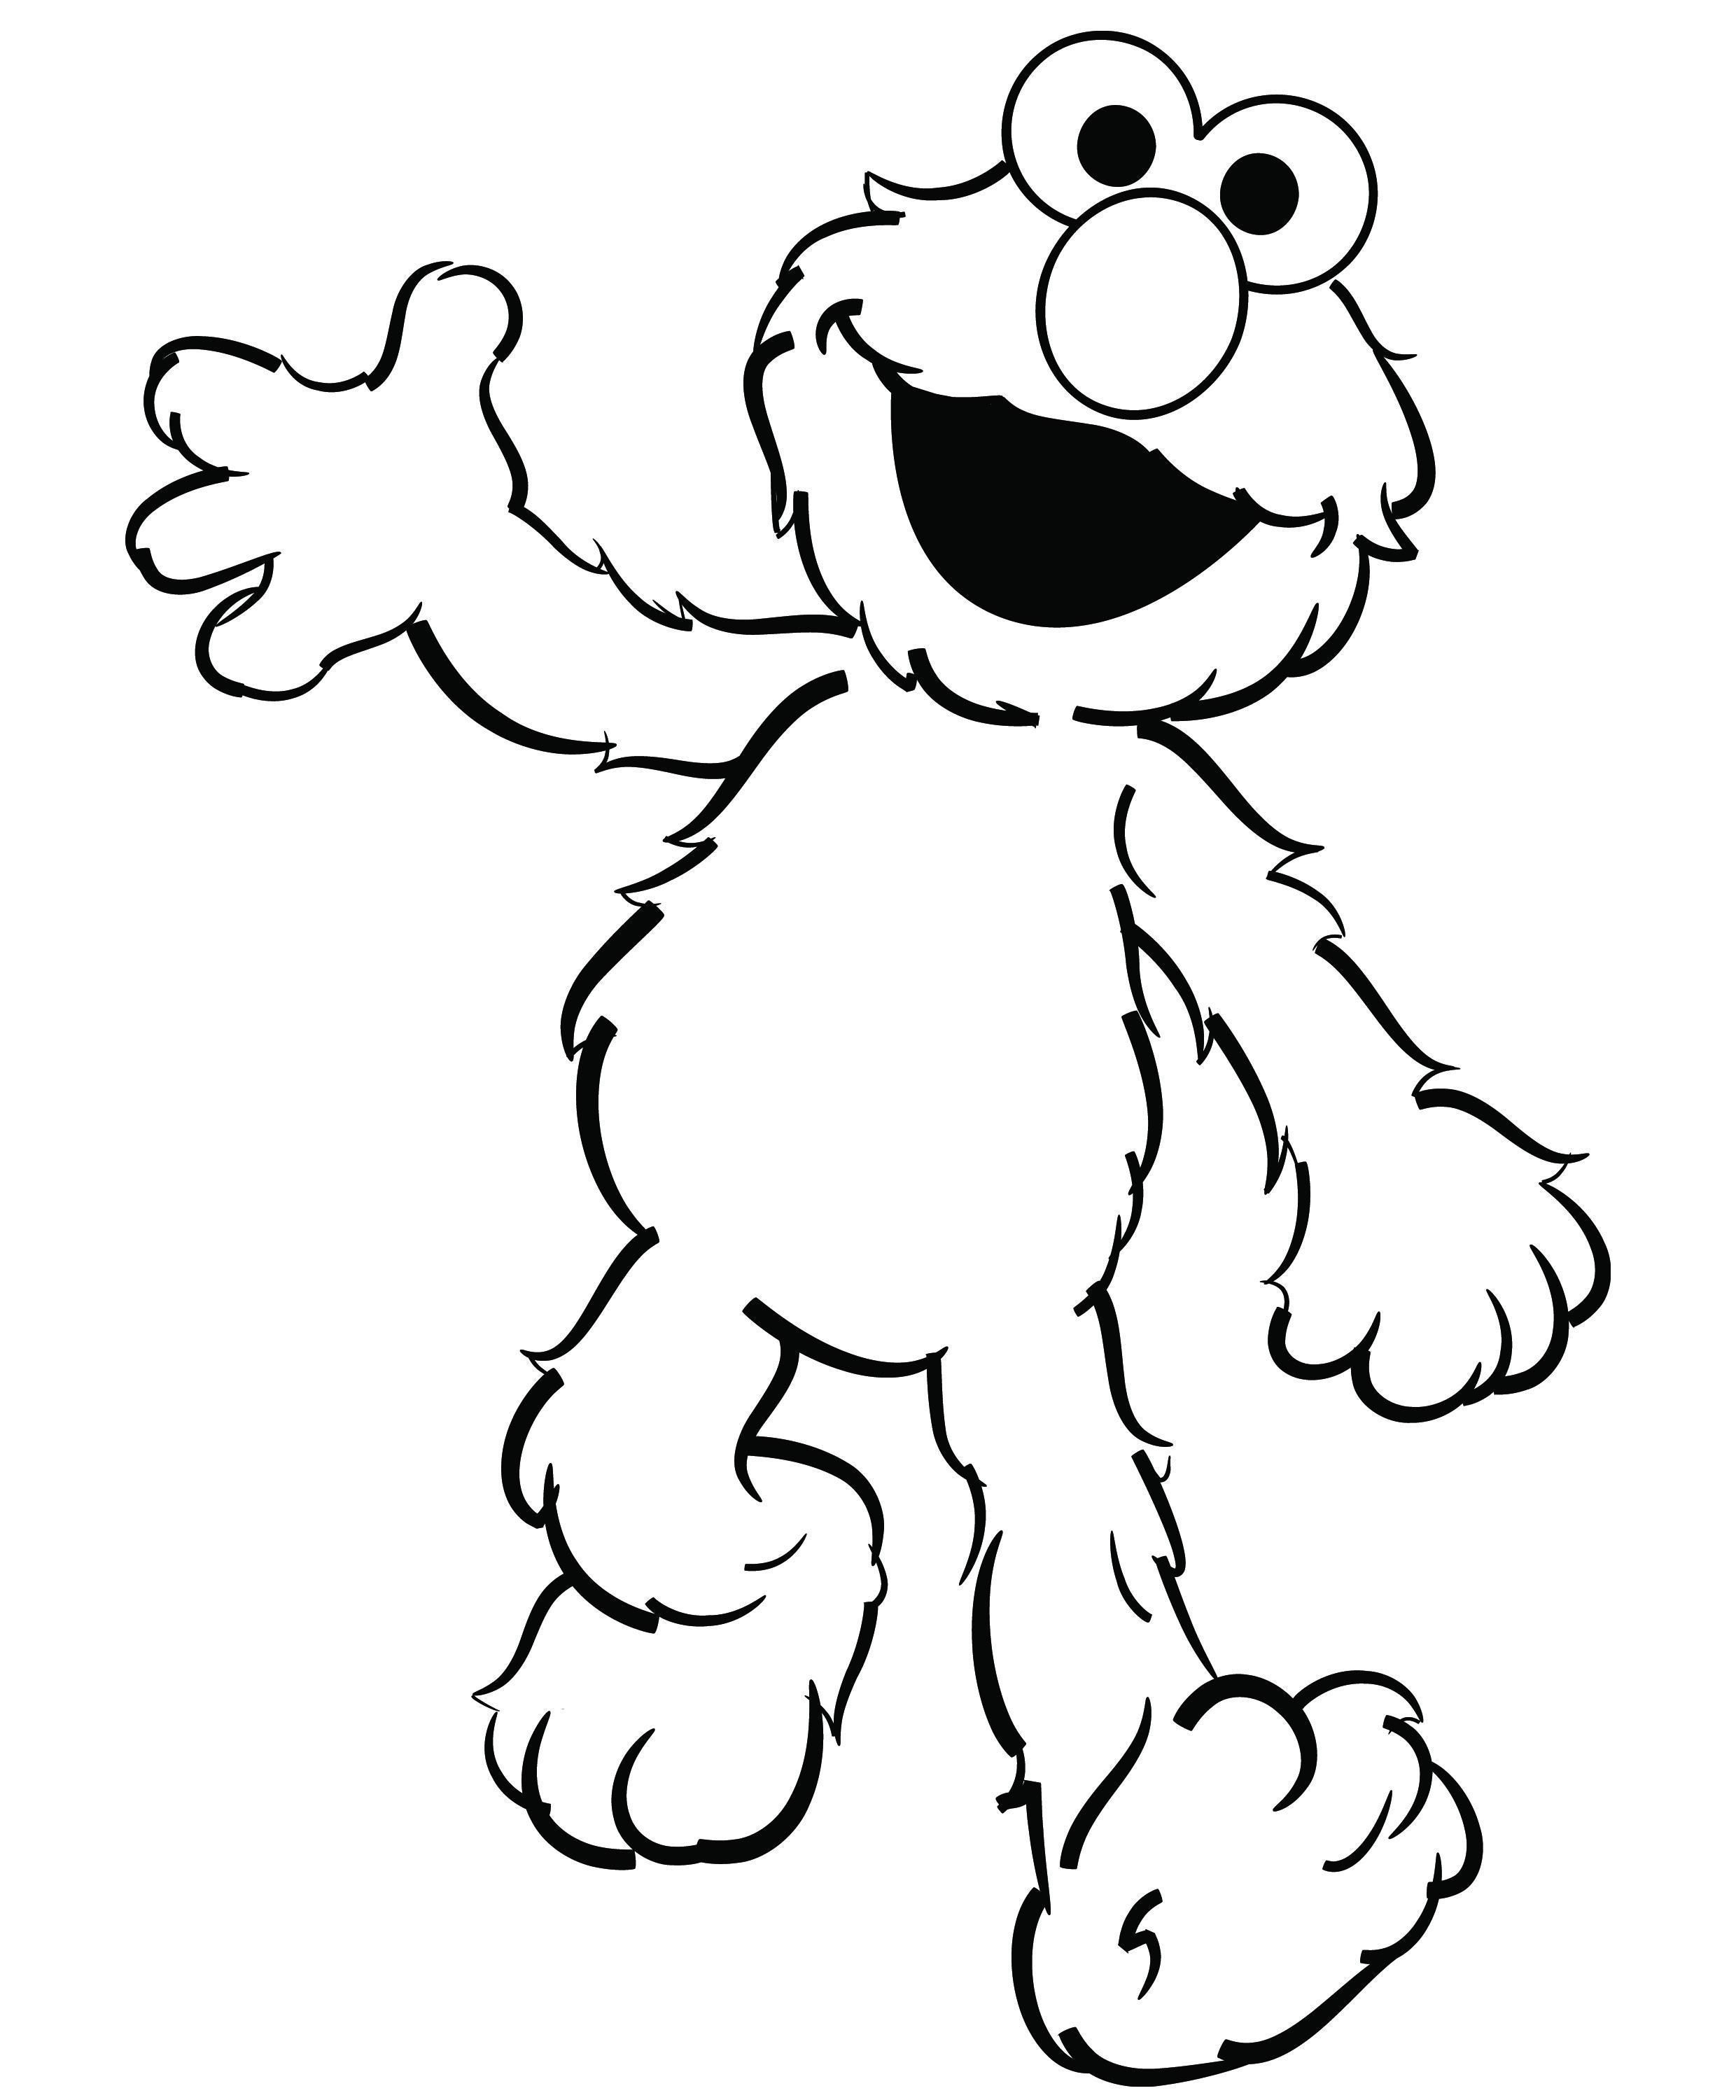 Cookie Monster And Elmo Coloring Pages at GetDrawings | Free download